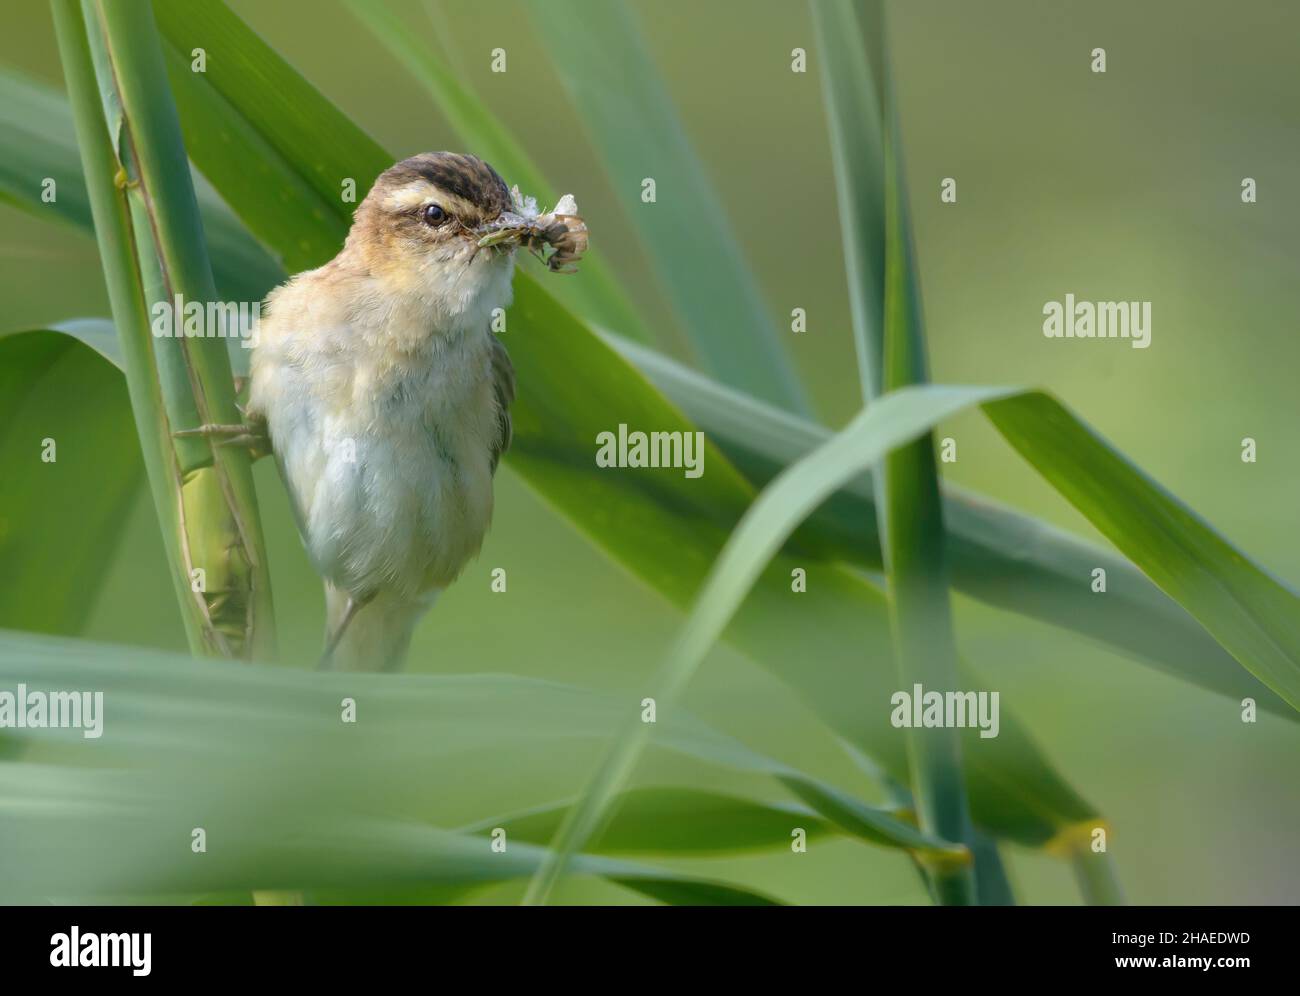 Sedge Warbler (Acrocephalus schoenobaenus) perched on a reed mace stem with insect food in beak for nestlings Stock Photo